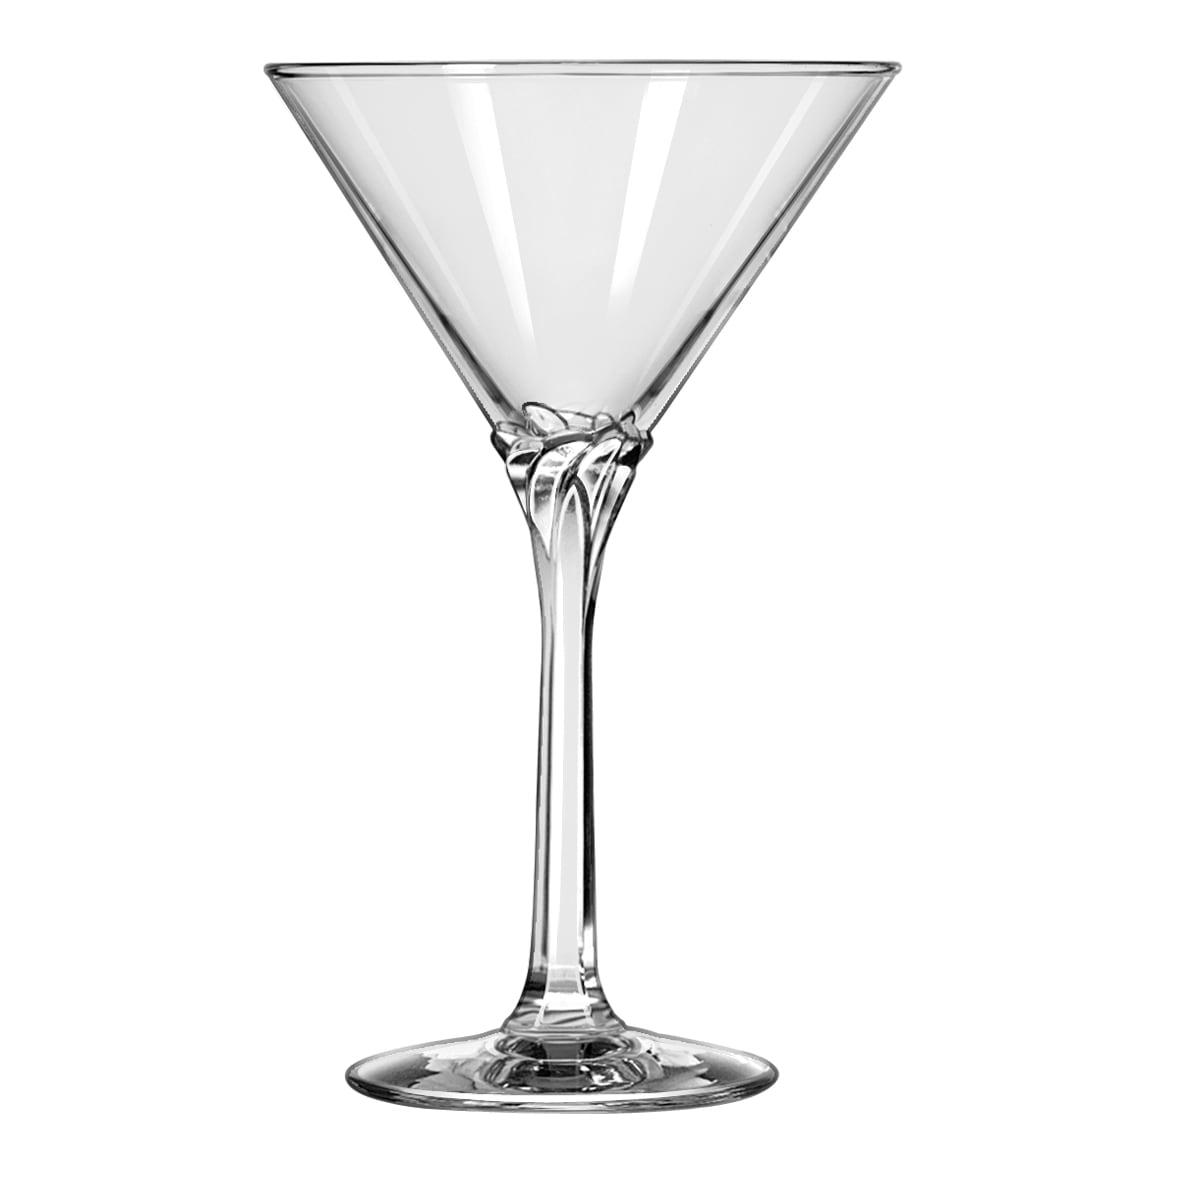 Libbey Martini Glasses with Storage Box - Set of 12